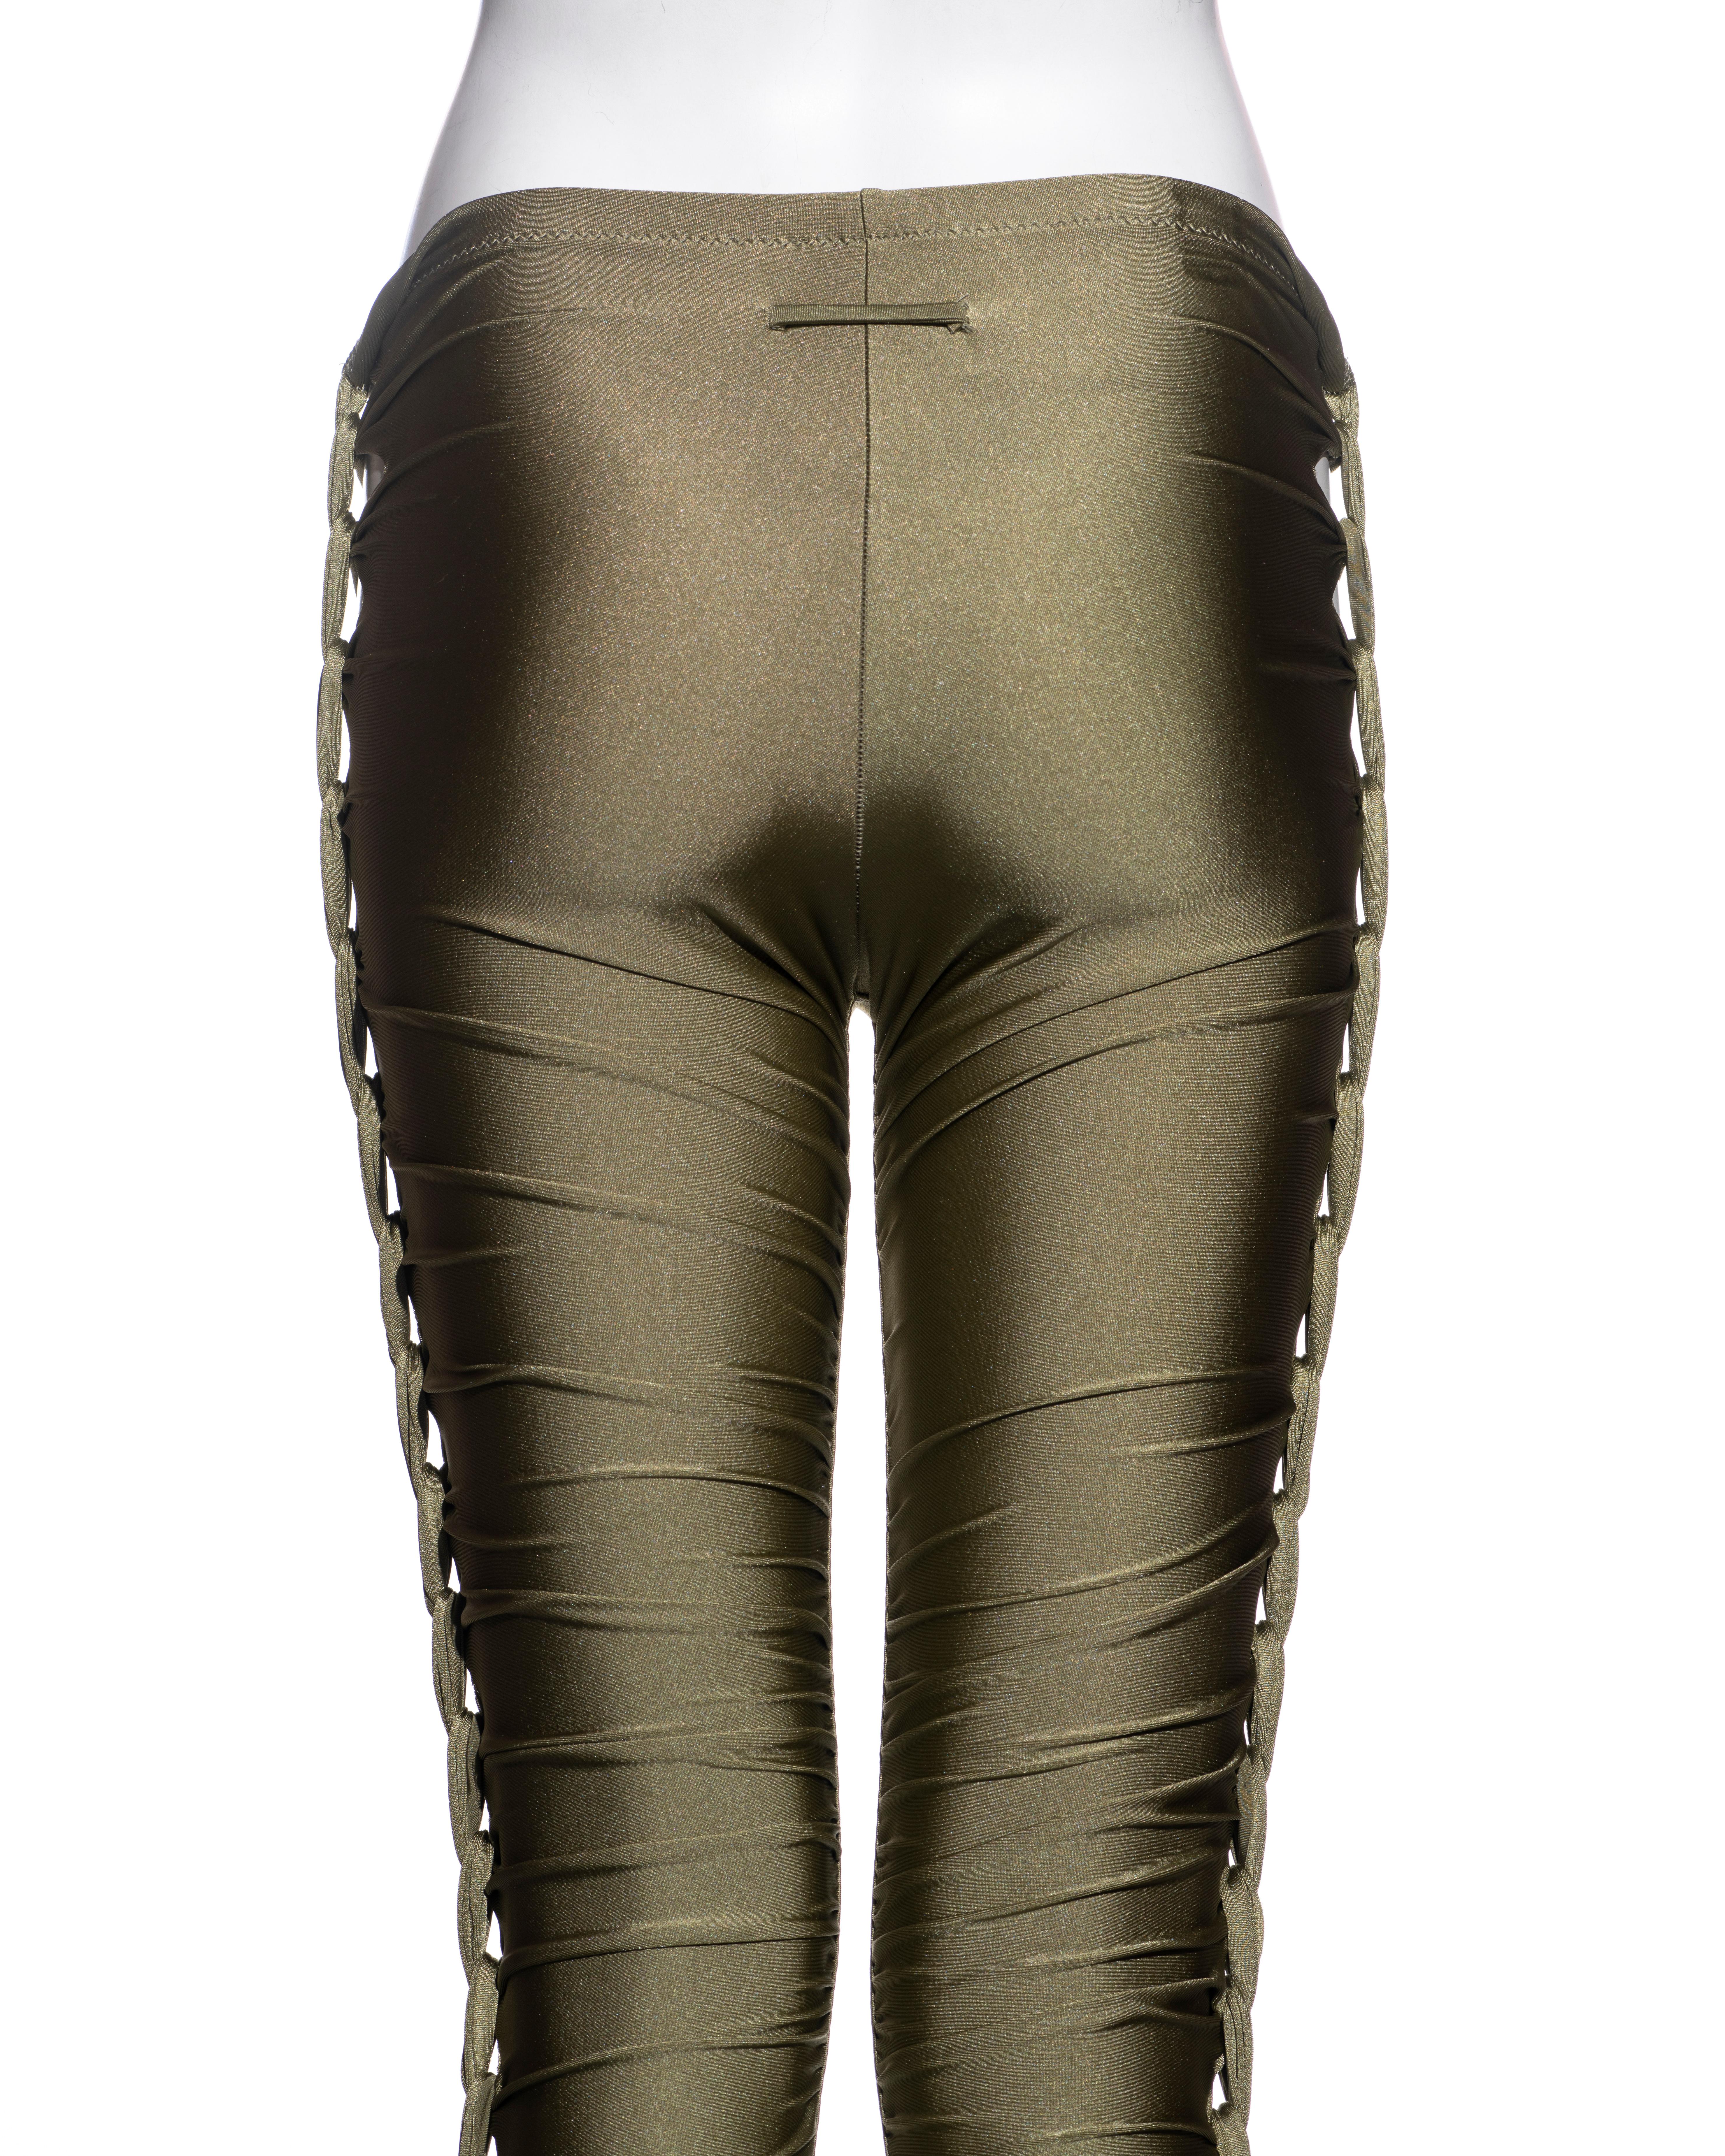 Jean Paul Gaultier green nylon jersey ruched leggings, ss 2011 For Sale 4